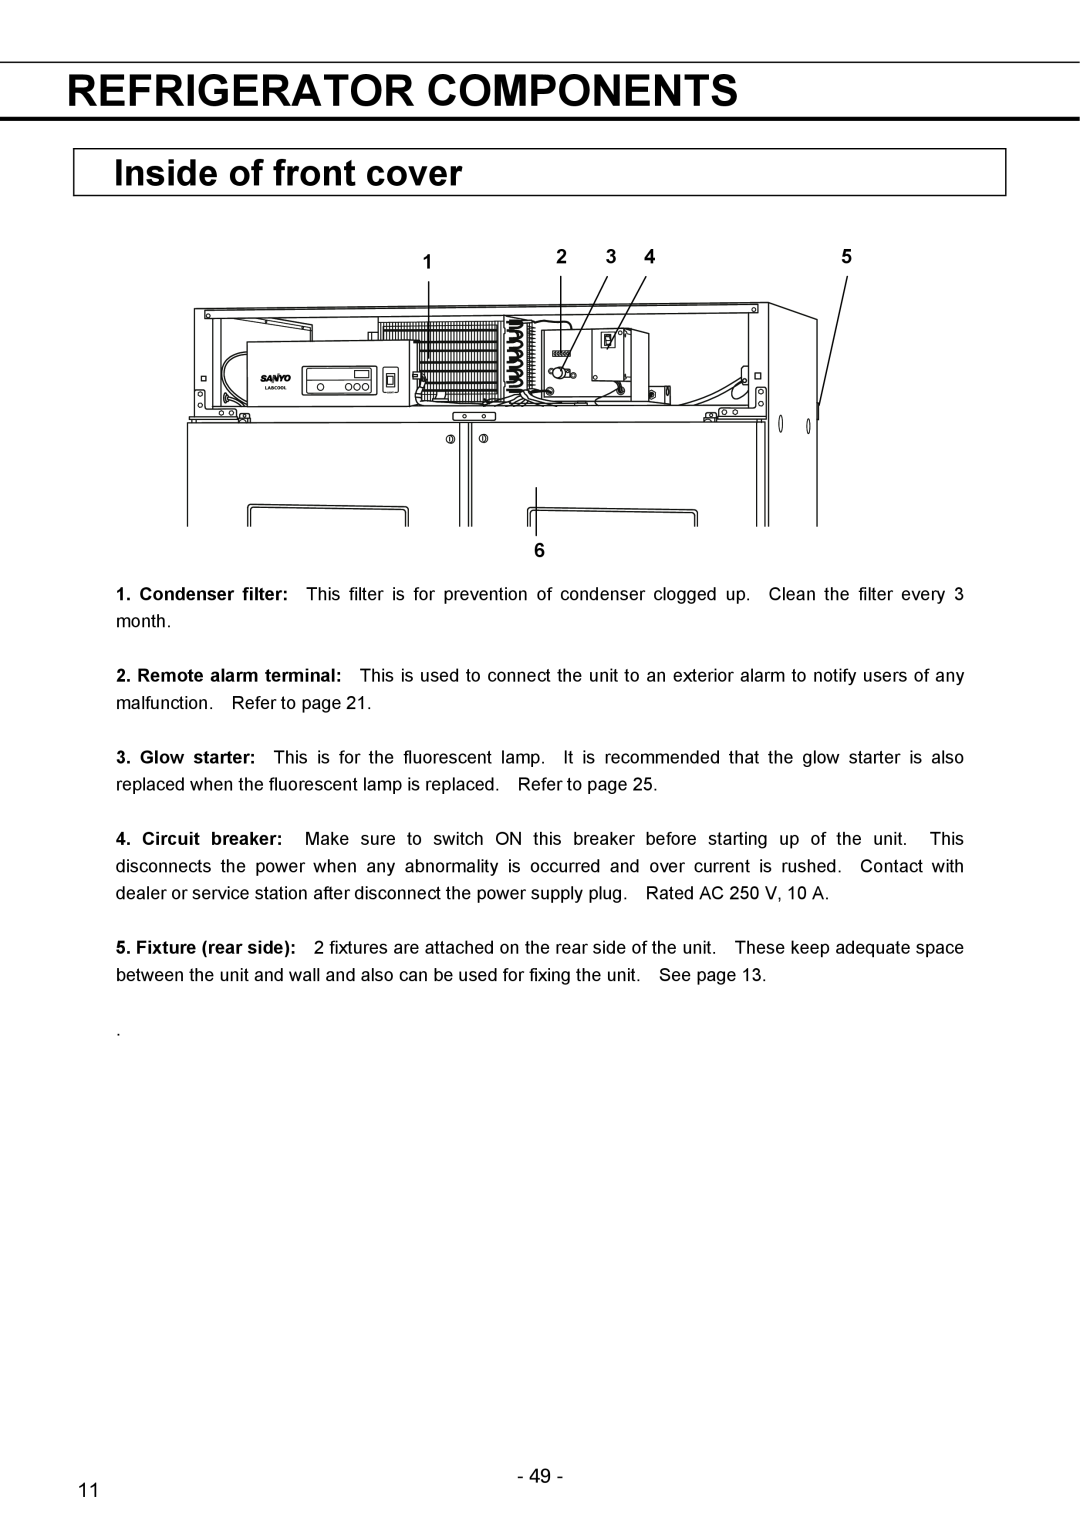 Sanyo MPR-1411R instruction manual Inside of front cover, Refrigerator Components 